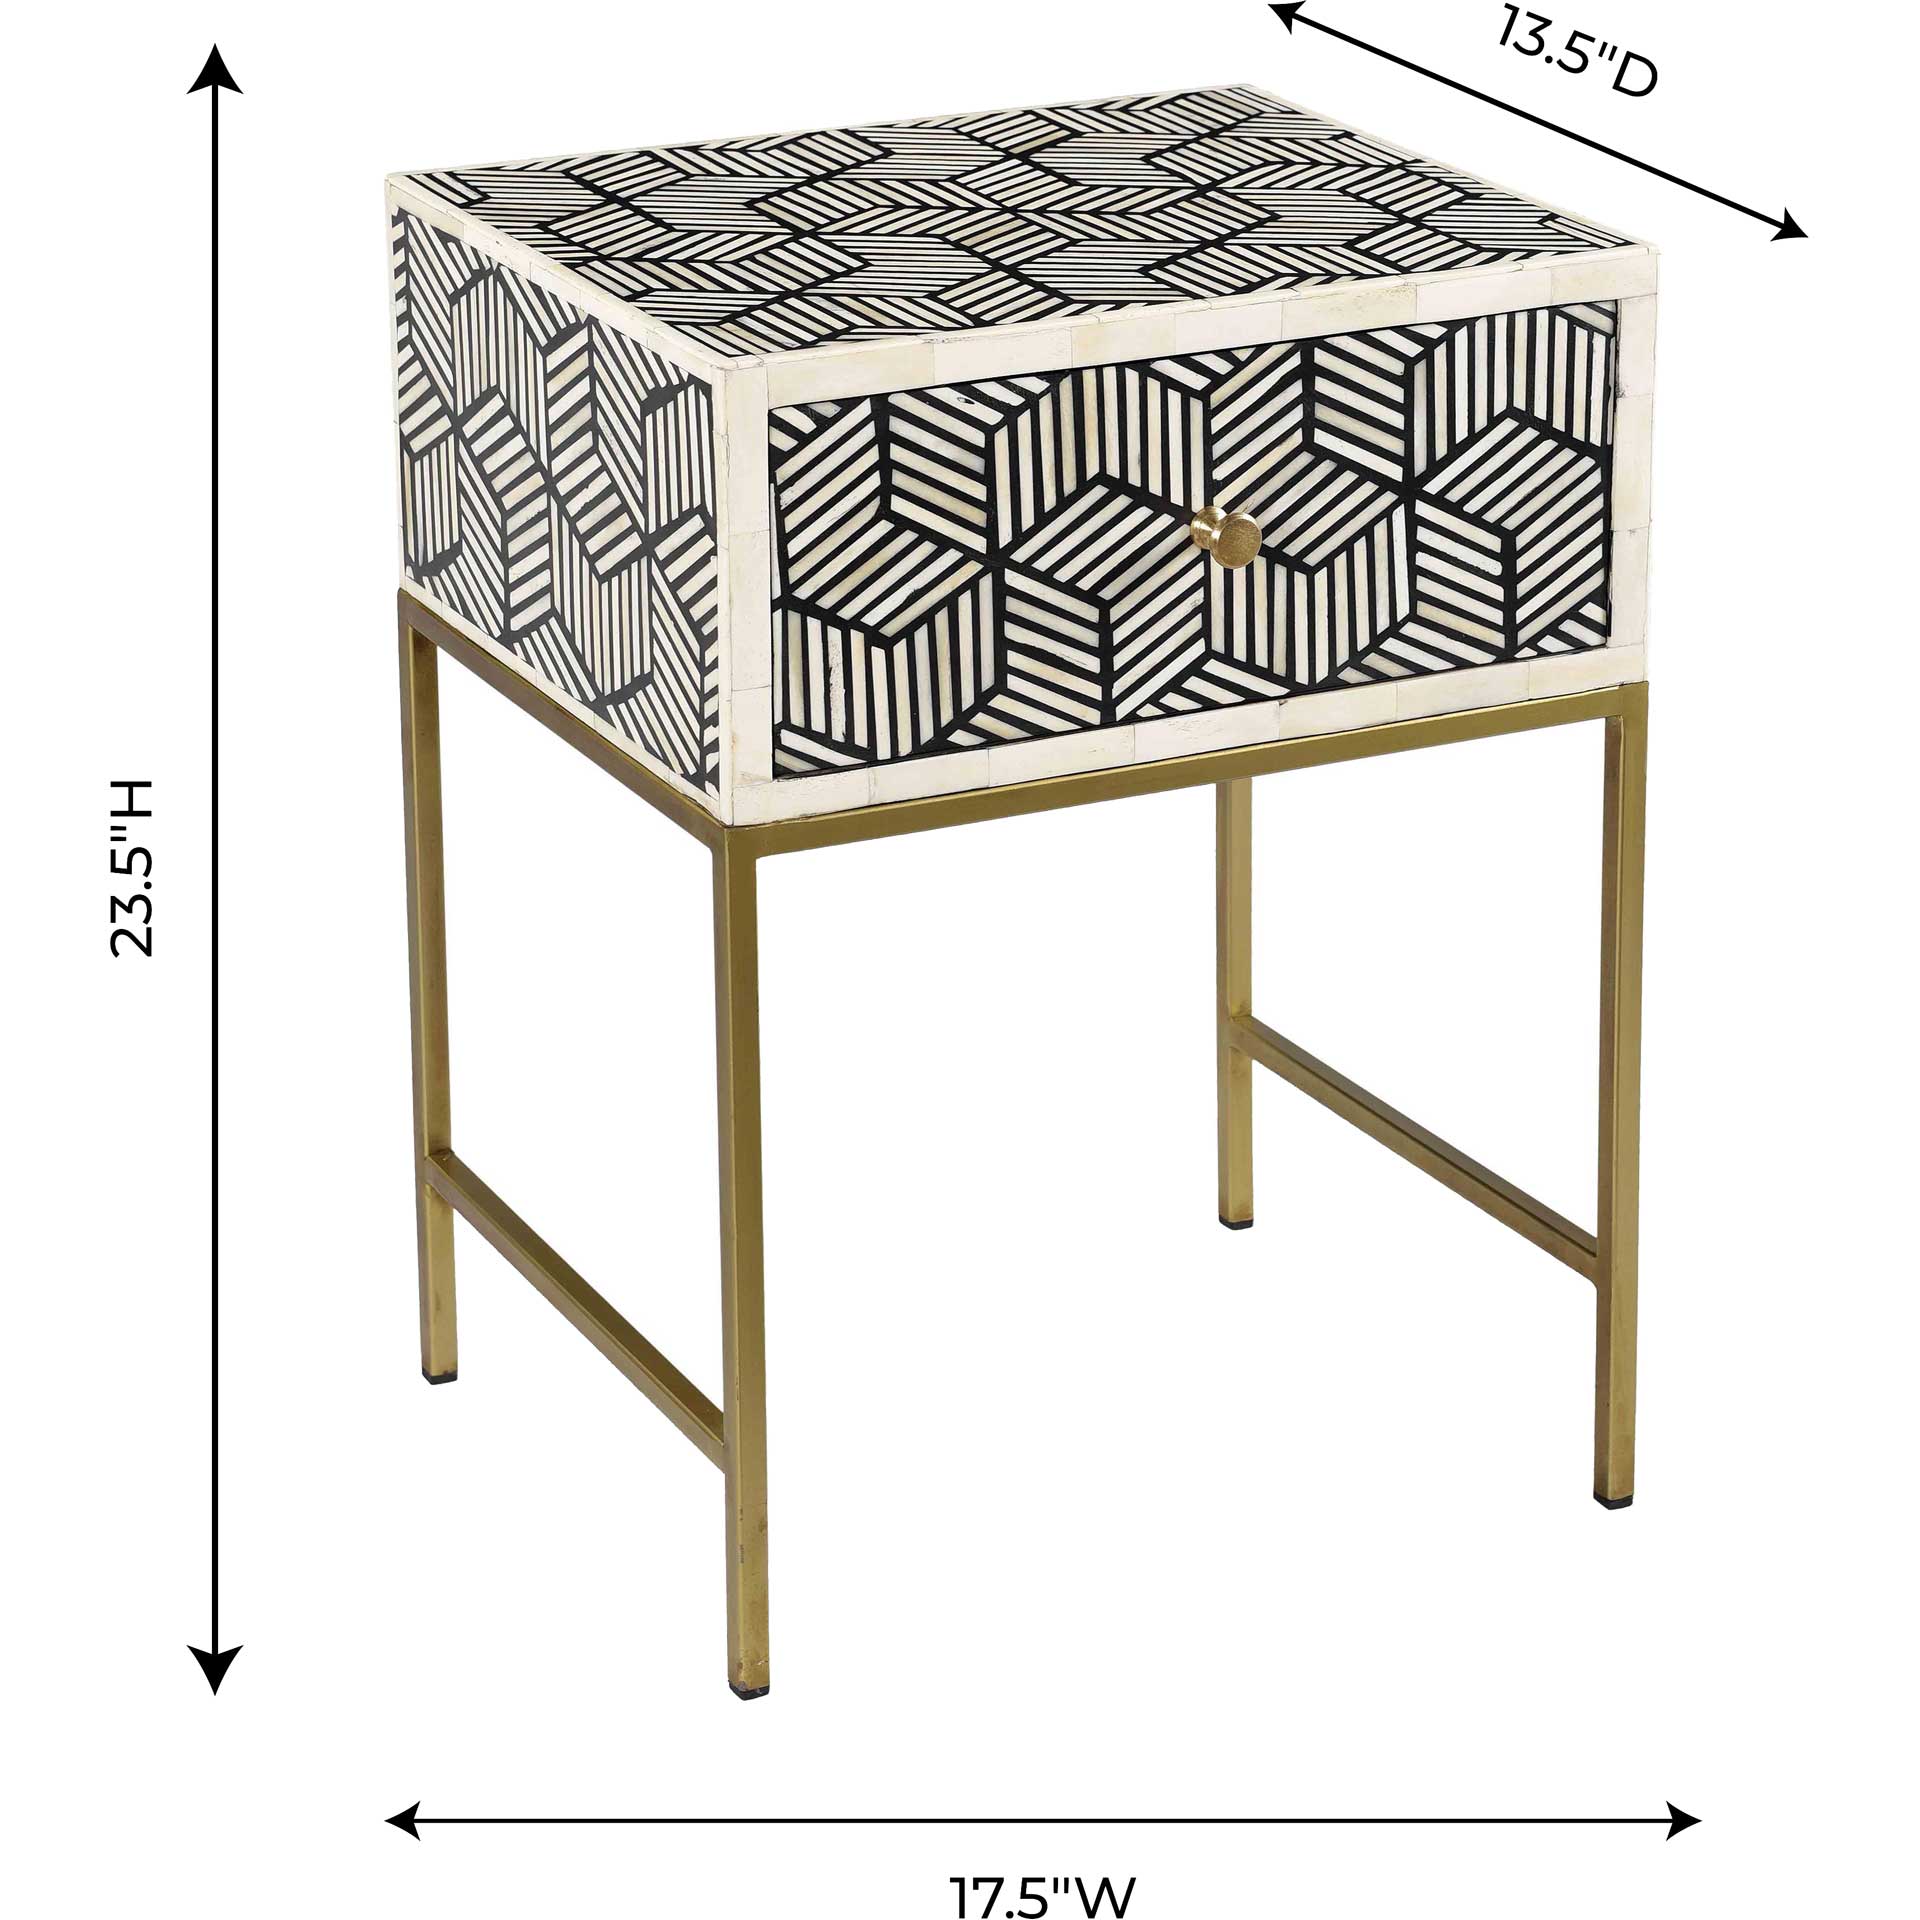 Bowen Inlay Side Table Black And White